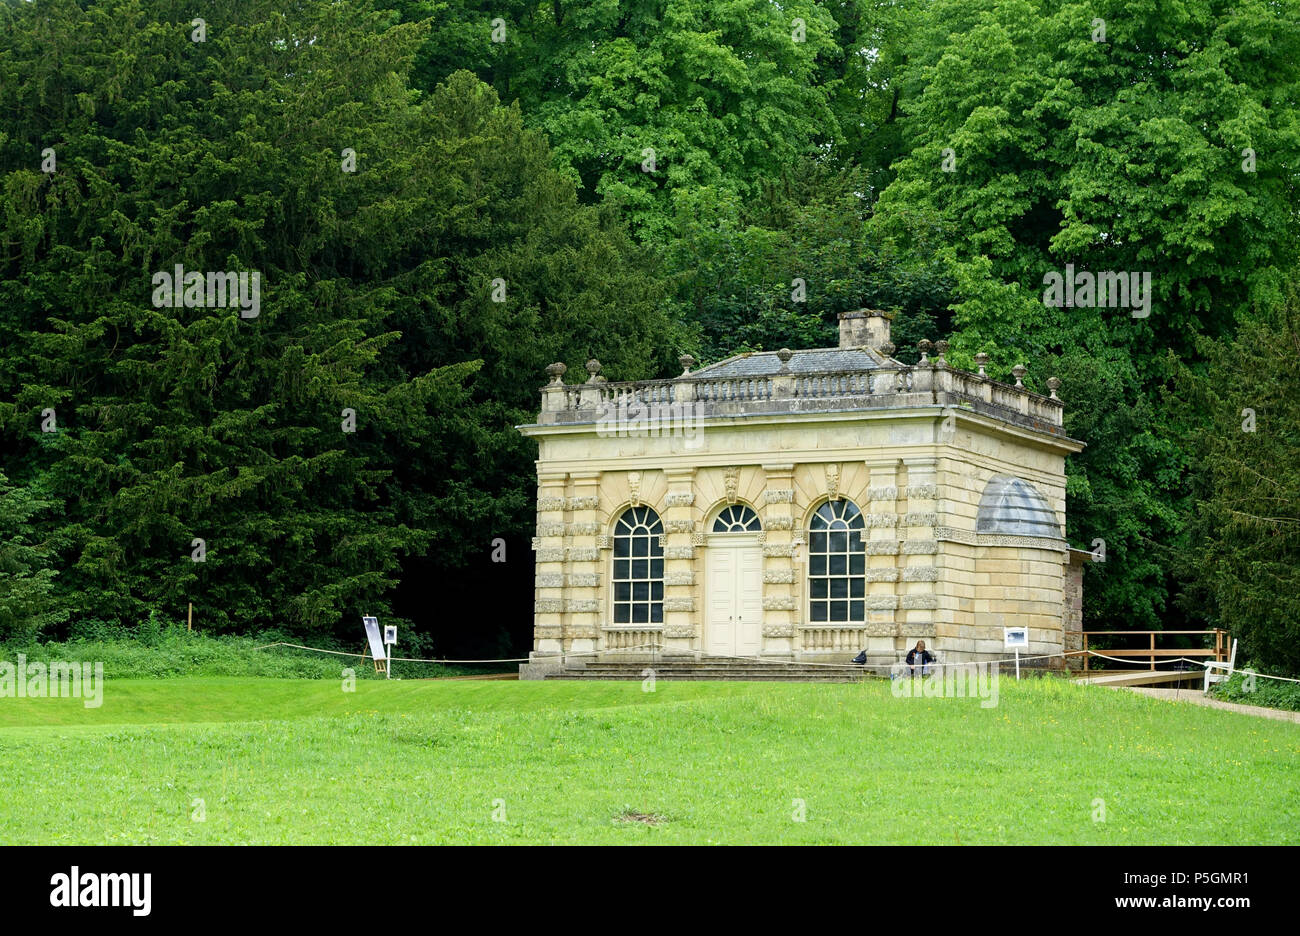 N/A. English: Banqueting House, Studley Royal Park - North Yorkshire, England. 14 June 2016, 08:35:18. Daderot 168 Banqueting House, Studley Royal Park - North Yorkshire, England - DSC00713 Stock Photo